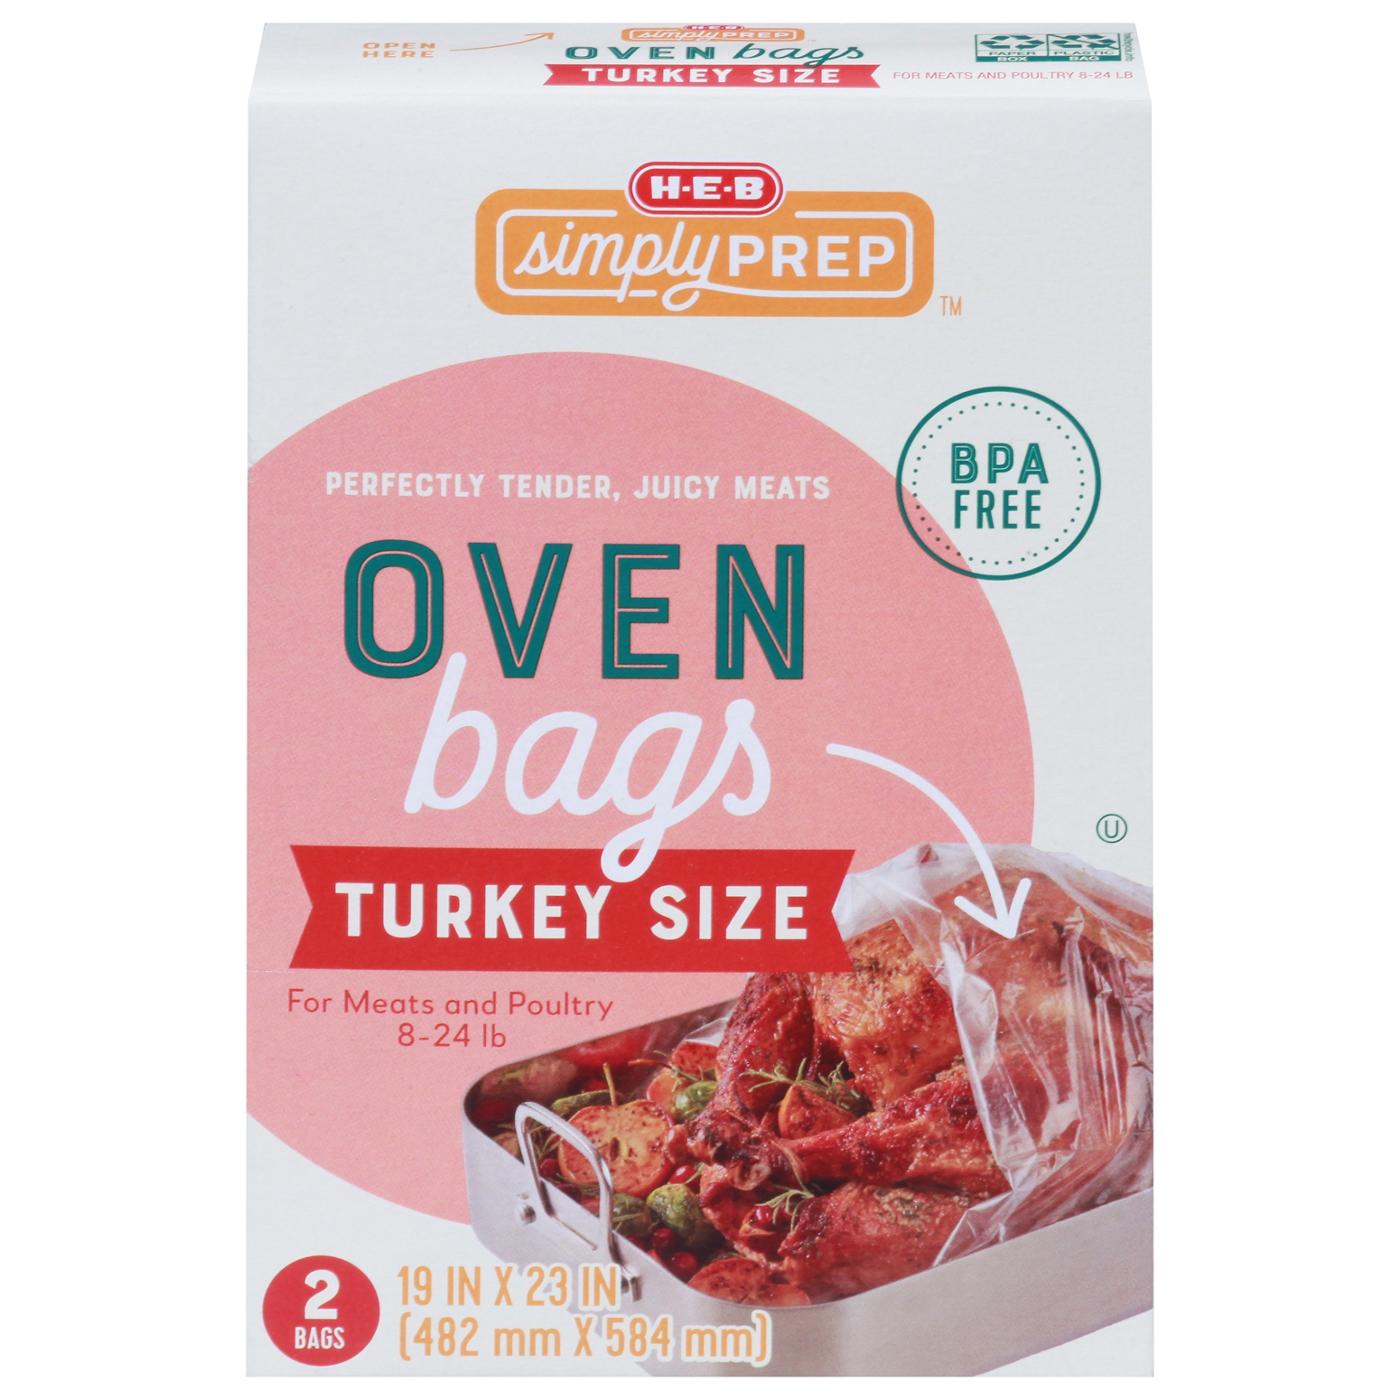 H-E-B Simply Prep Oven Bags Turkey Size; image 1 of 2